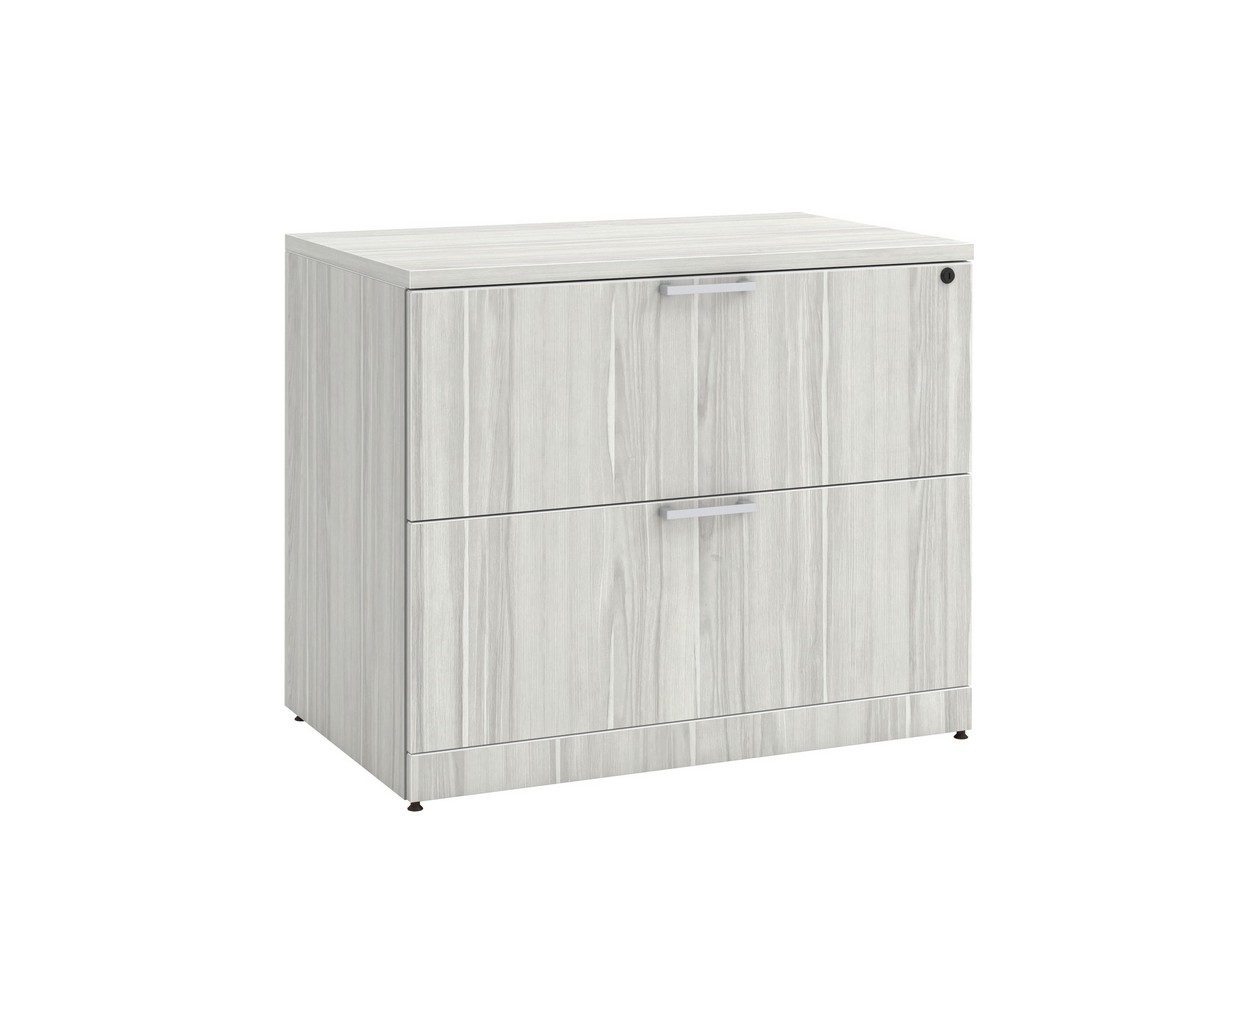 2 Drawer Lateral Filing Cabinet with Silver Birch Finish